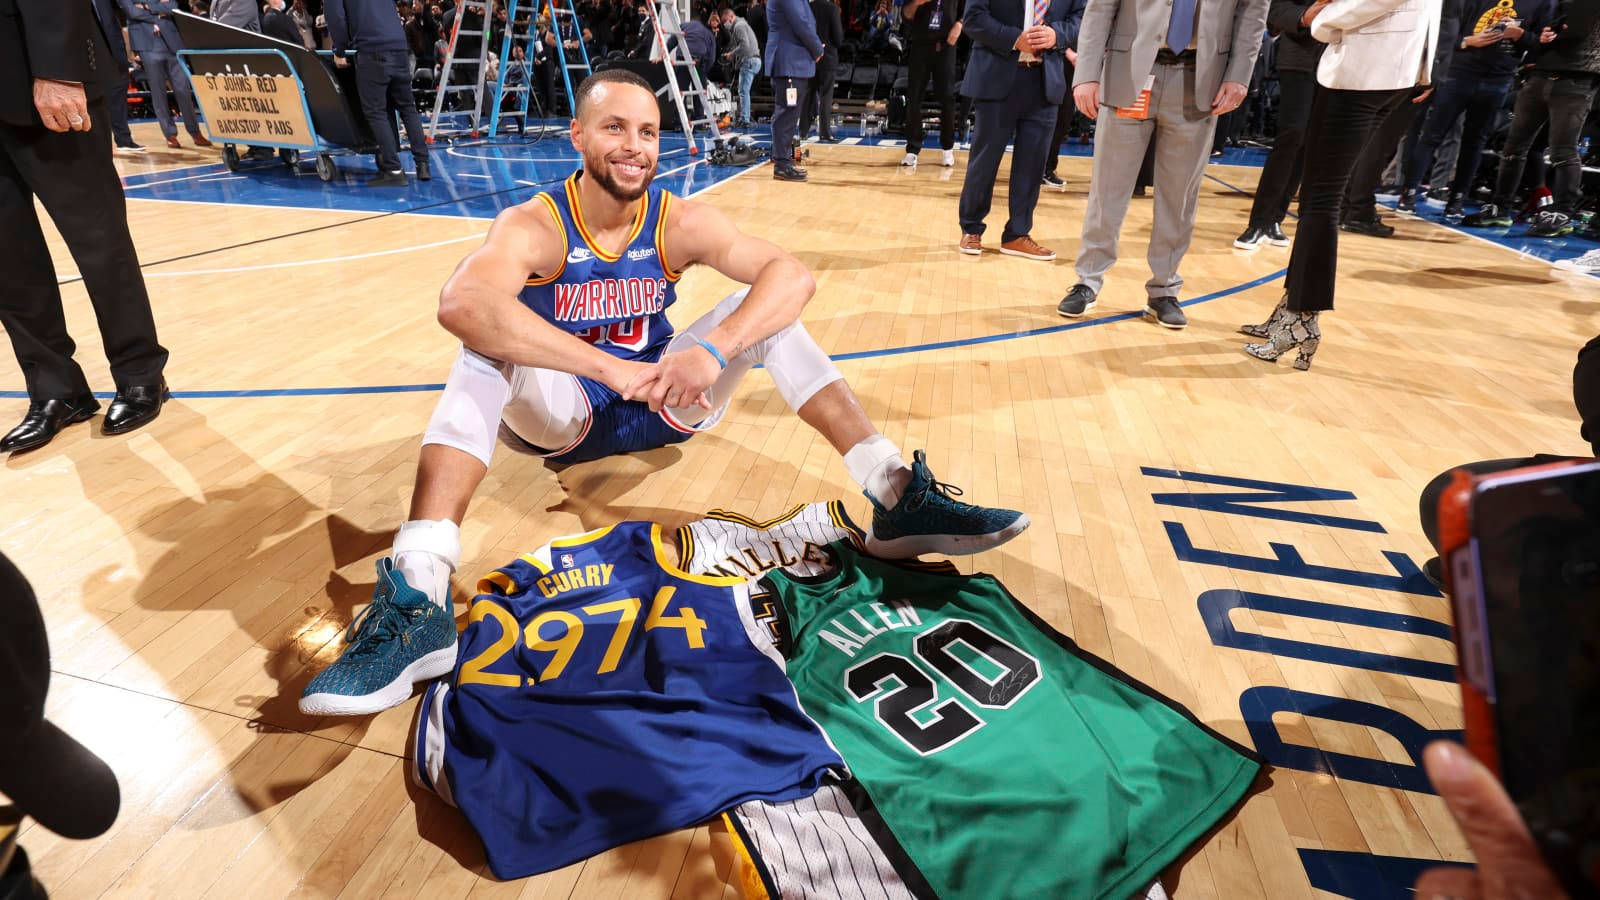 Steph Curry On The Floor With Jerseys Wallpaper